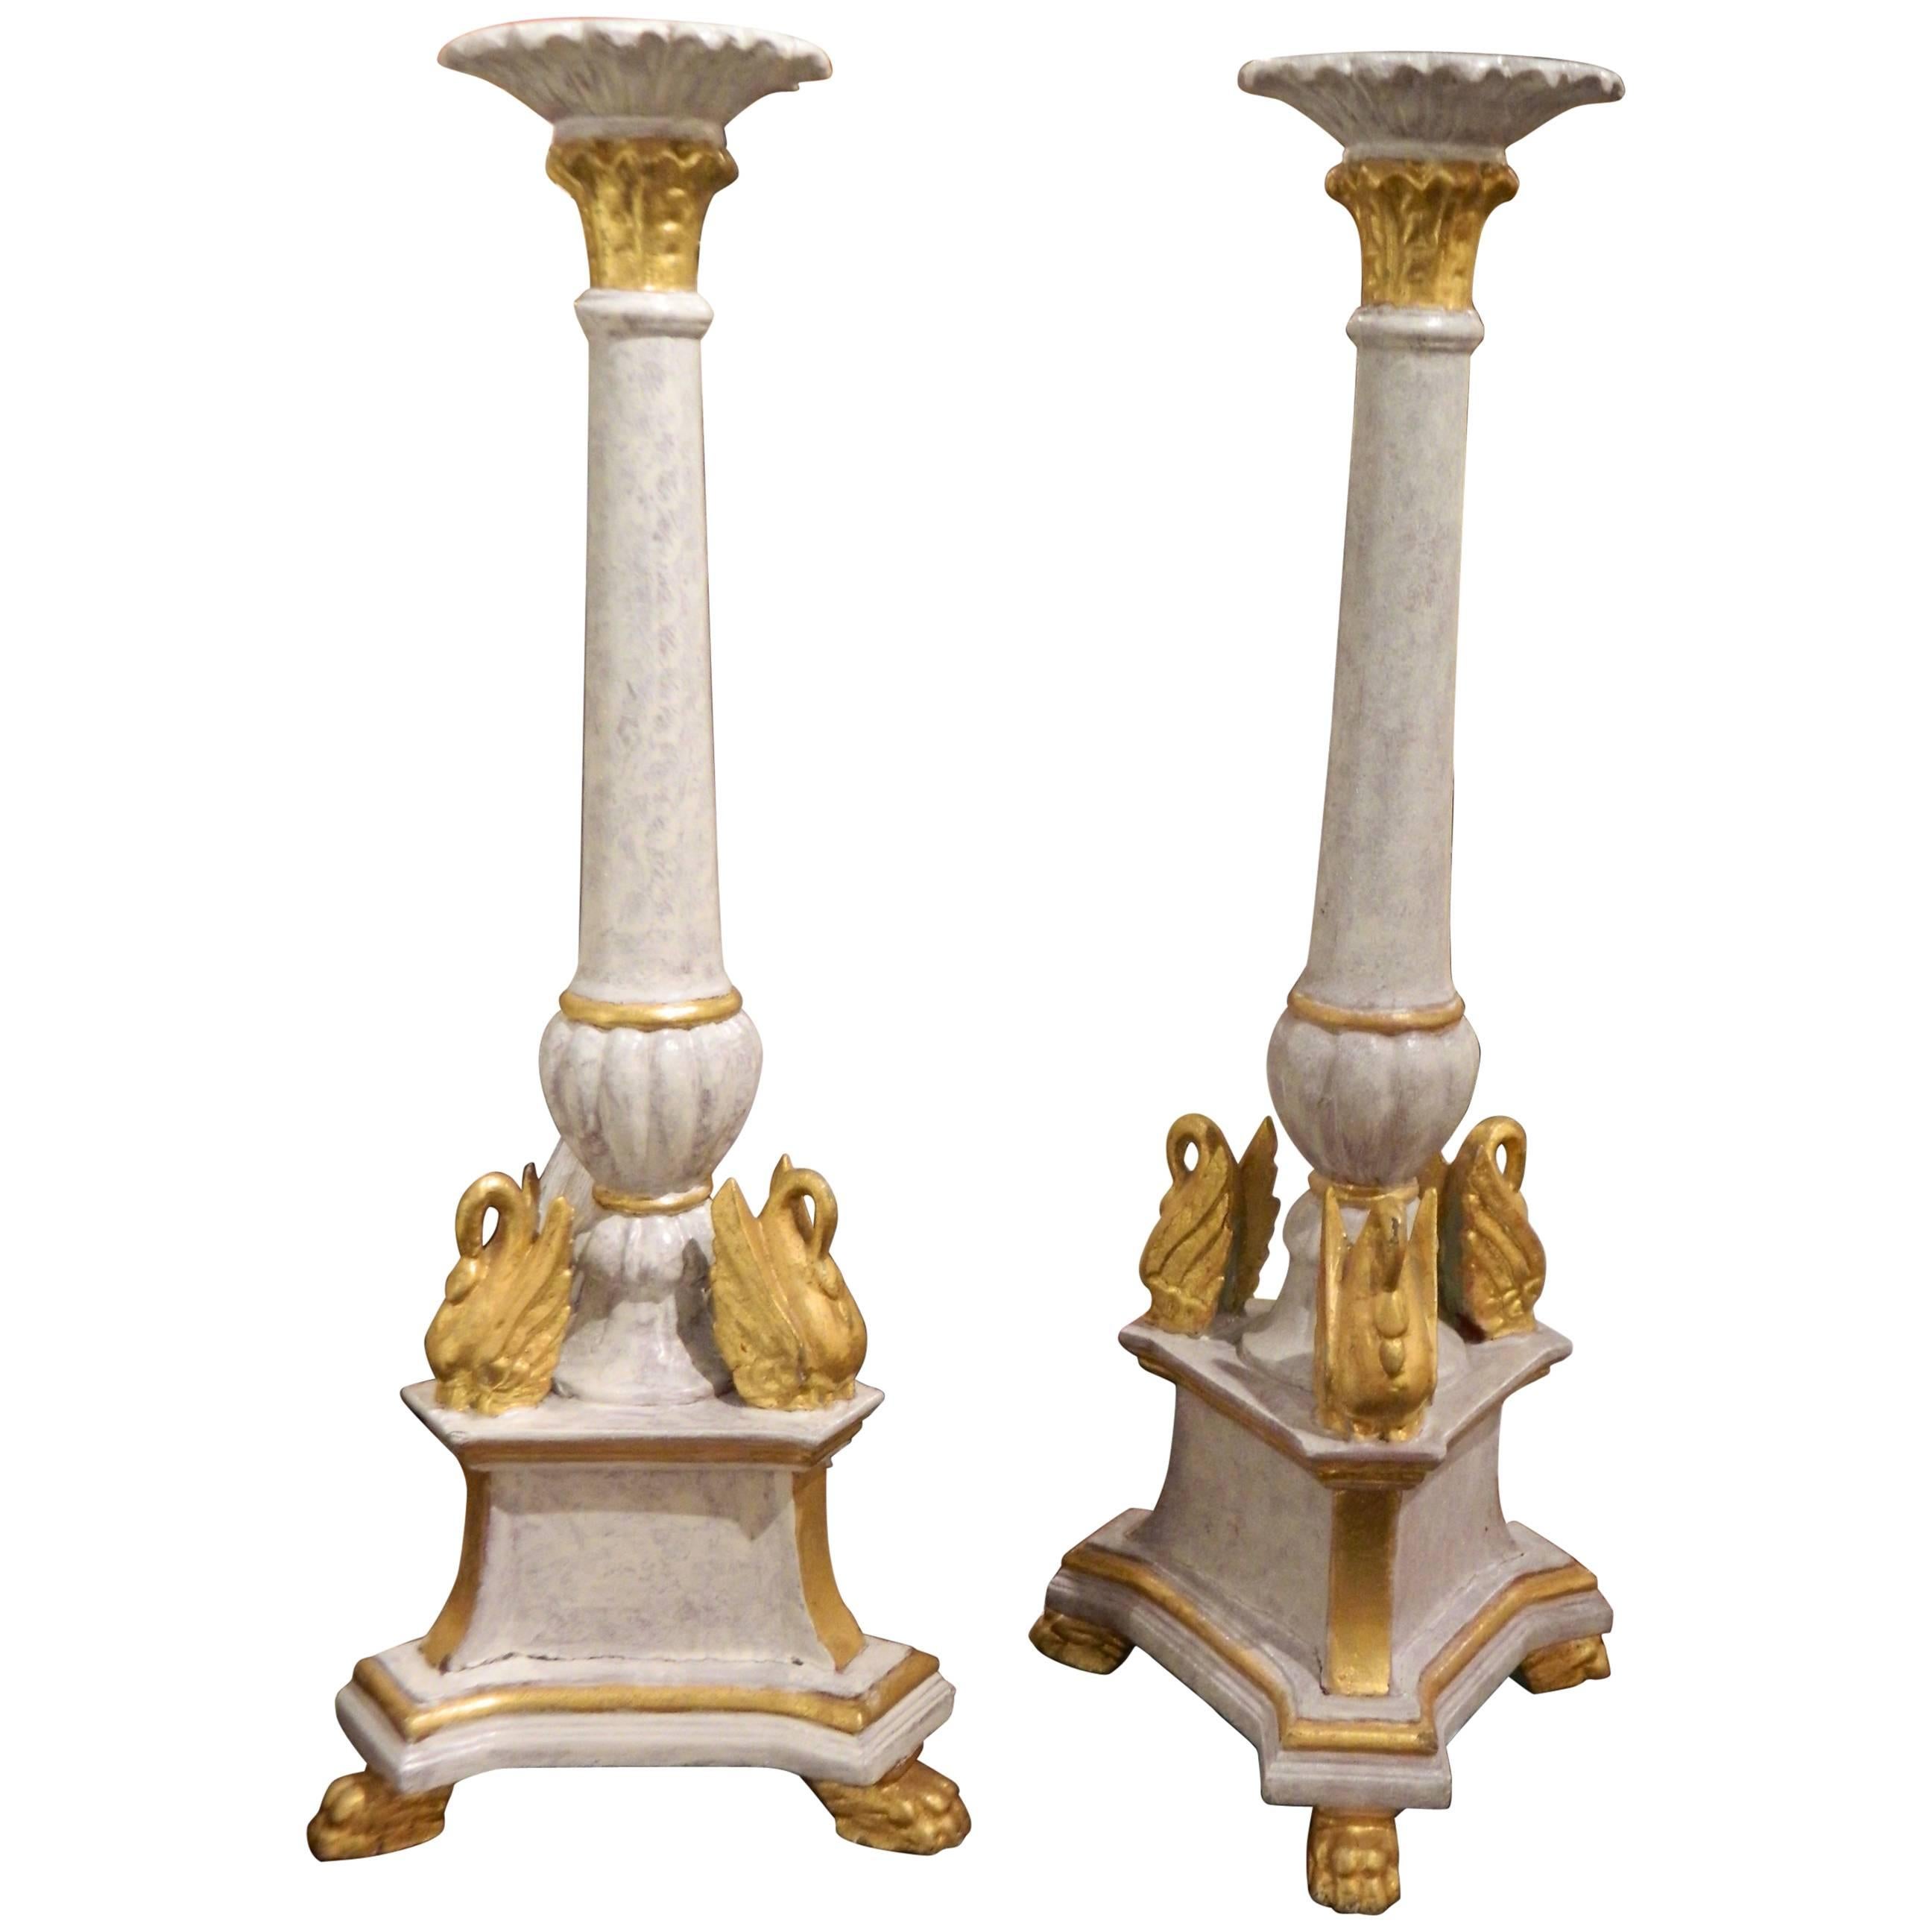 Pair of Italian Painted Wood Candlesticks with Gilded Swans, Early 20th Century